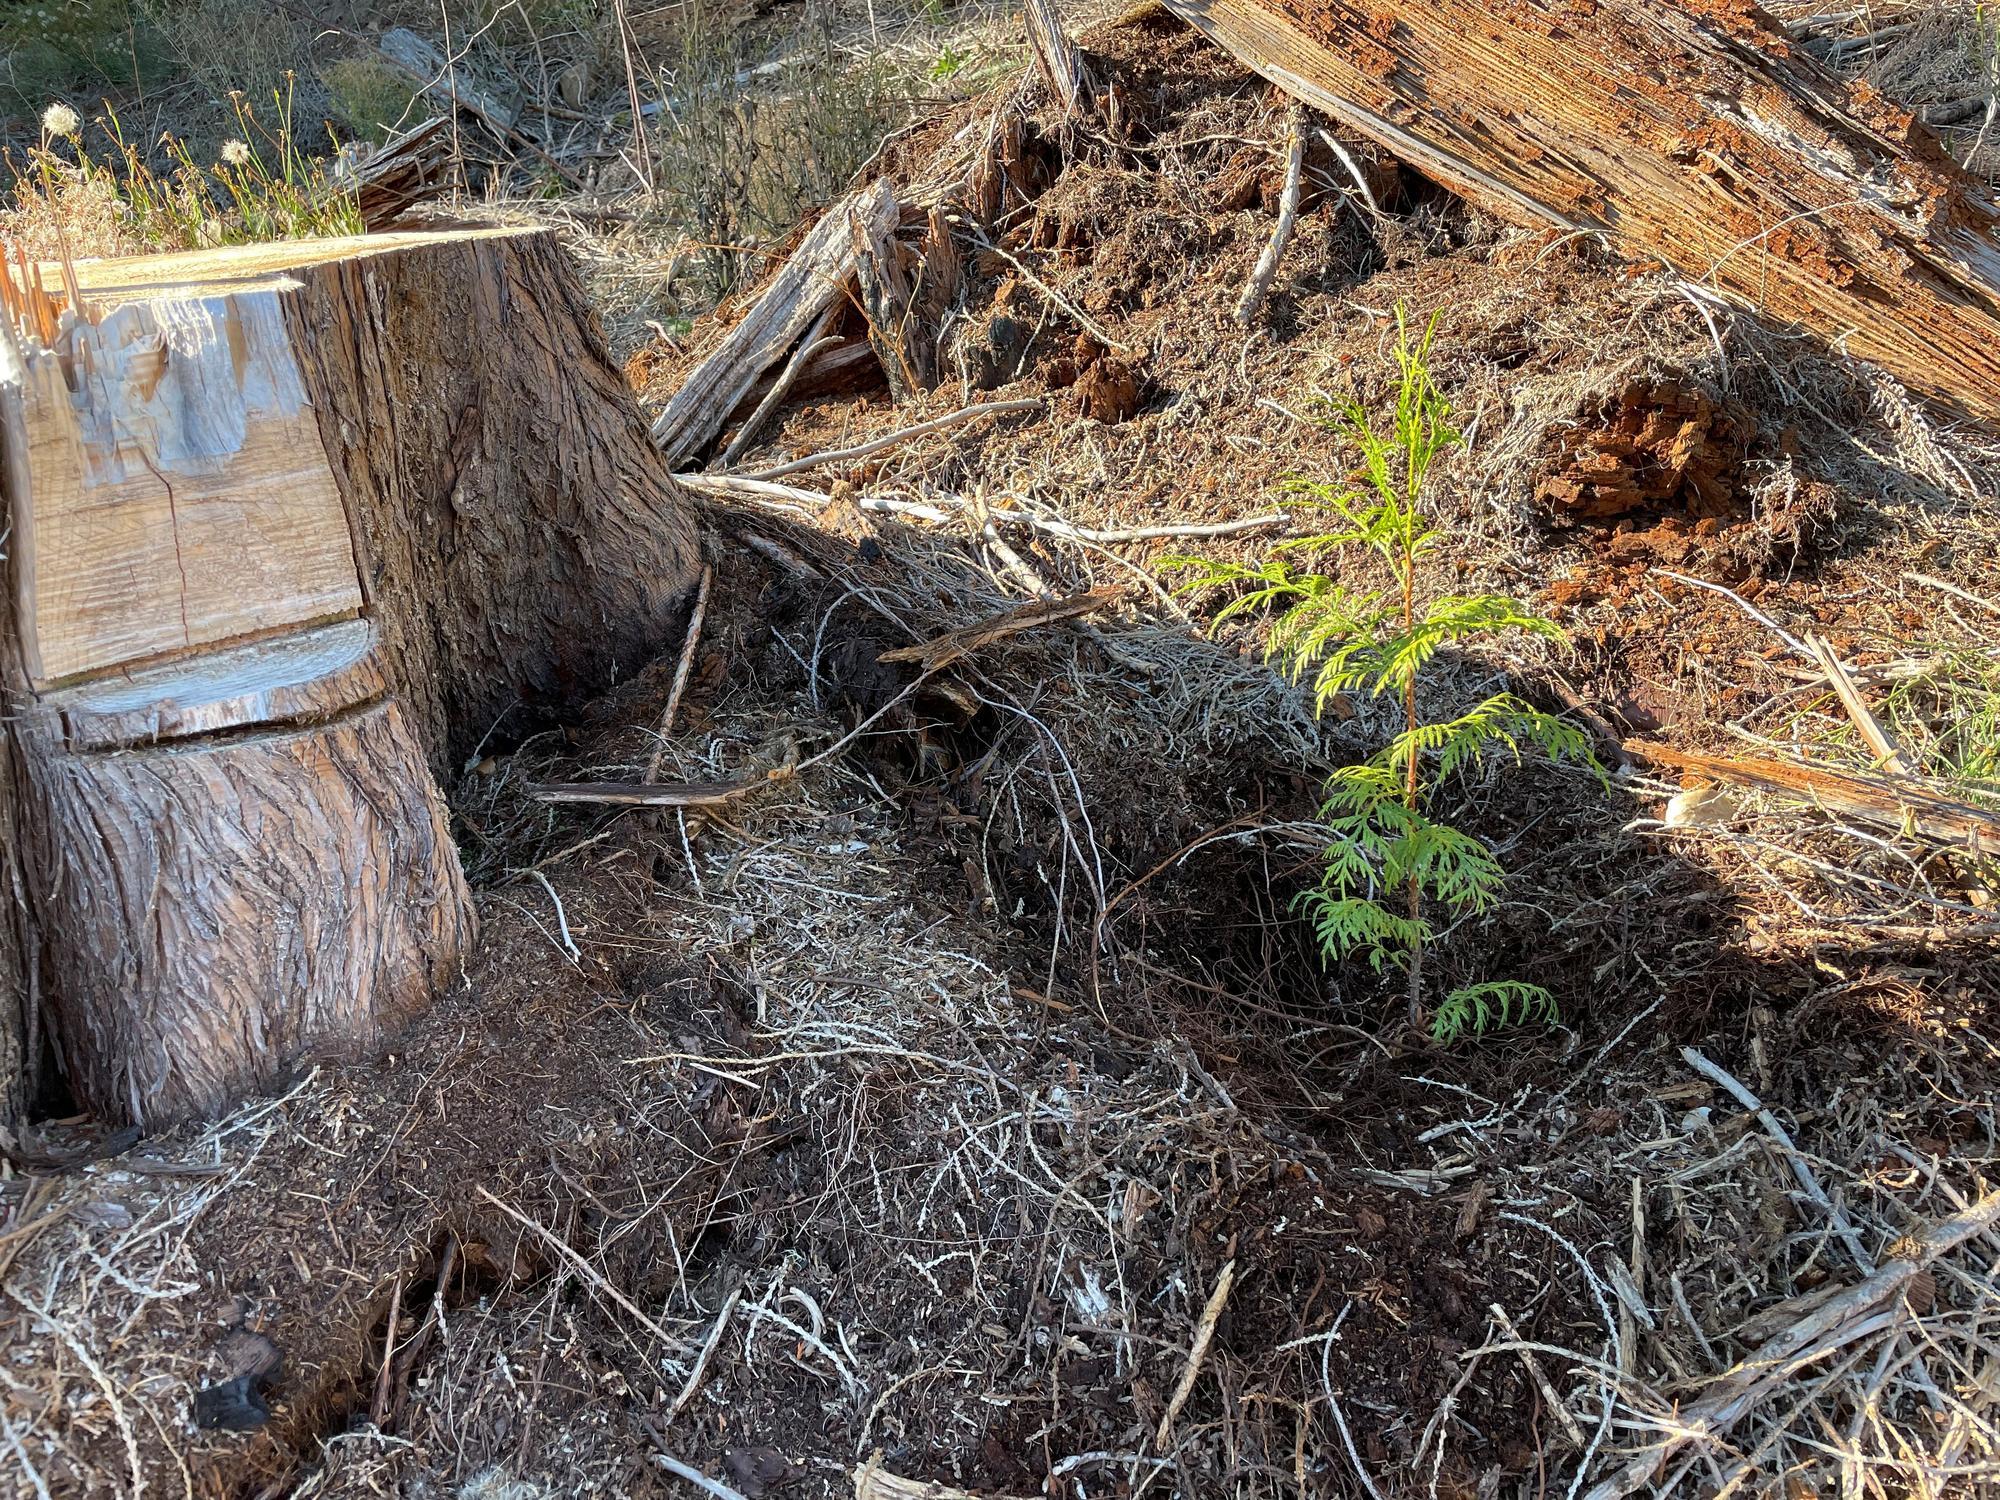 A tree seedling is shown in the shadow of a stump in a burned forest area.